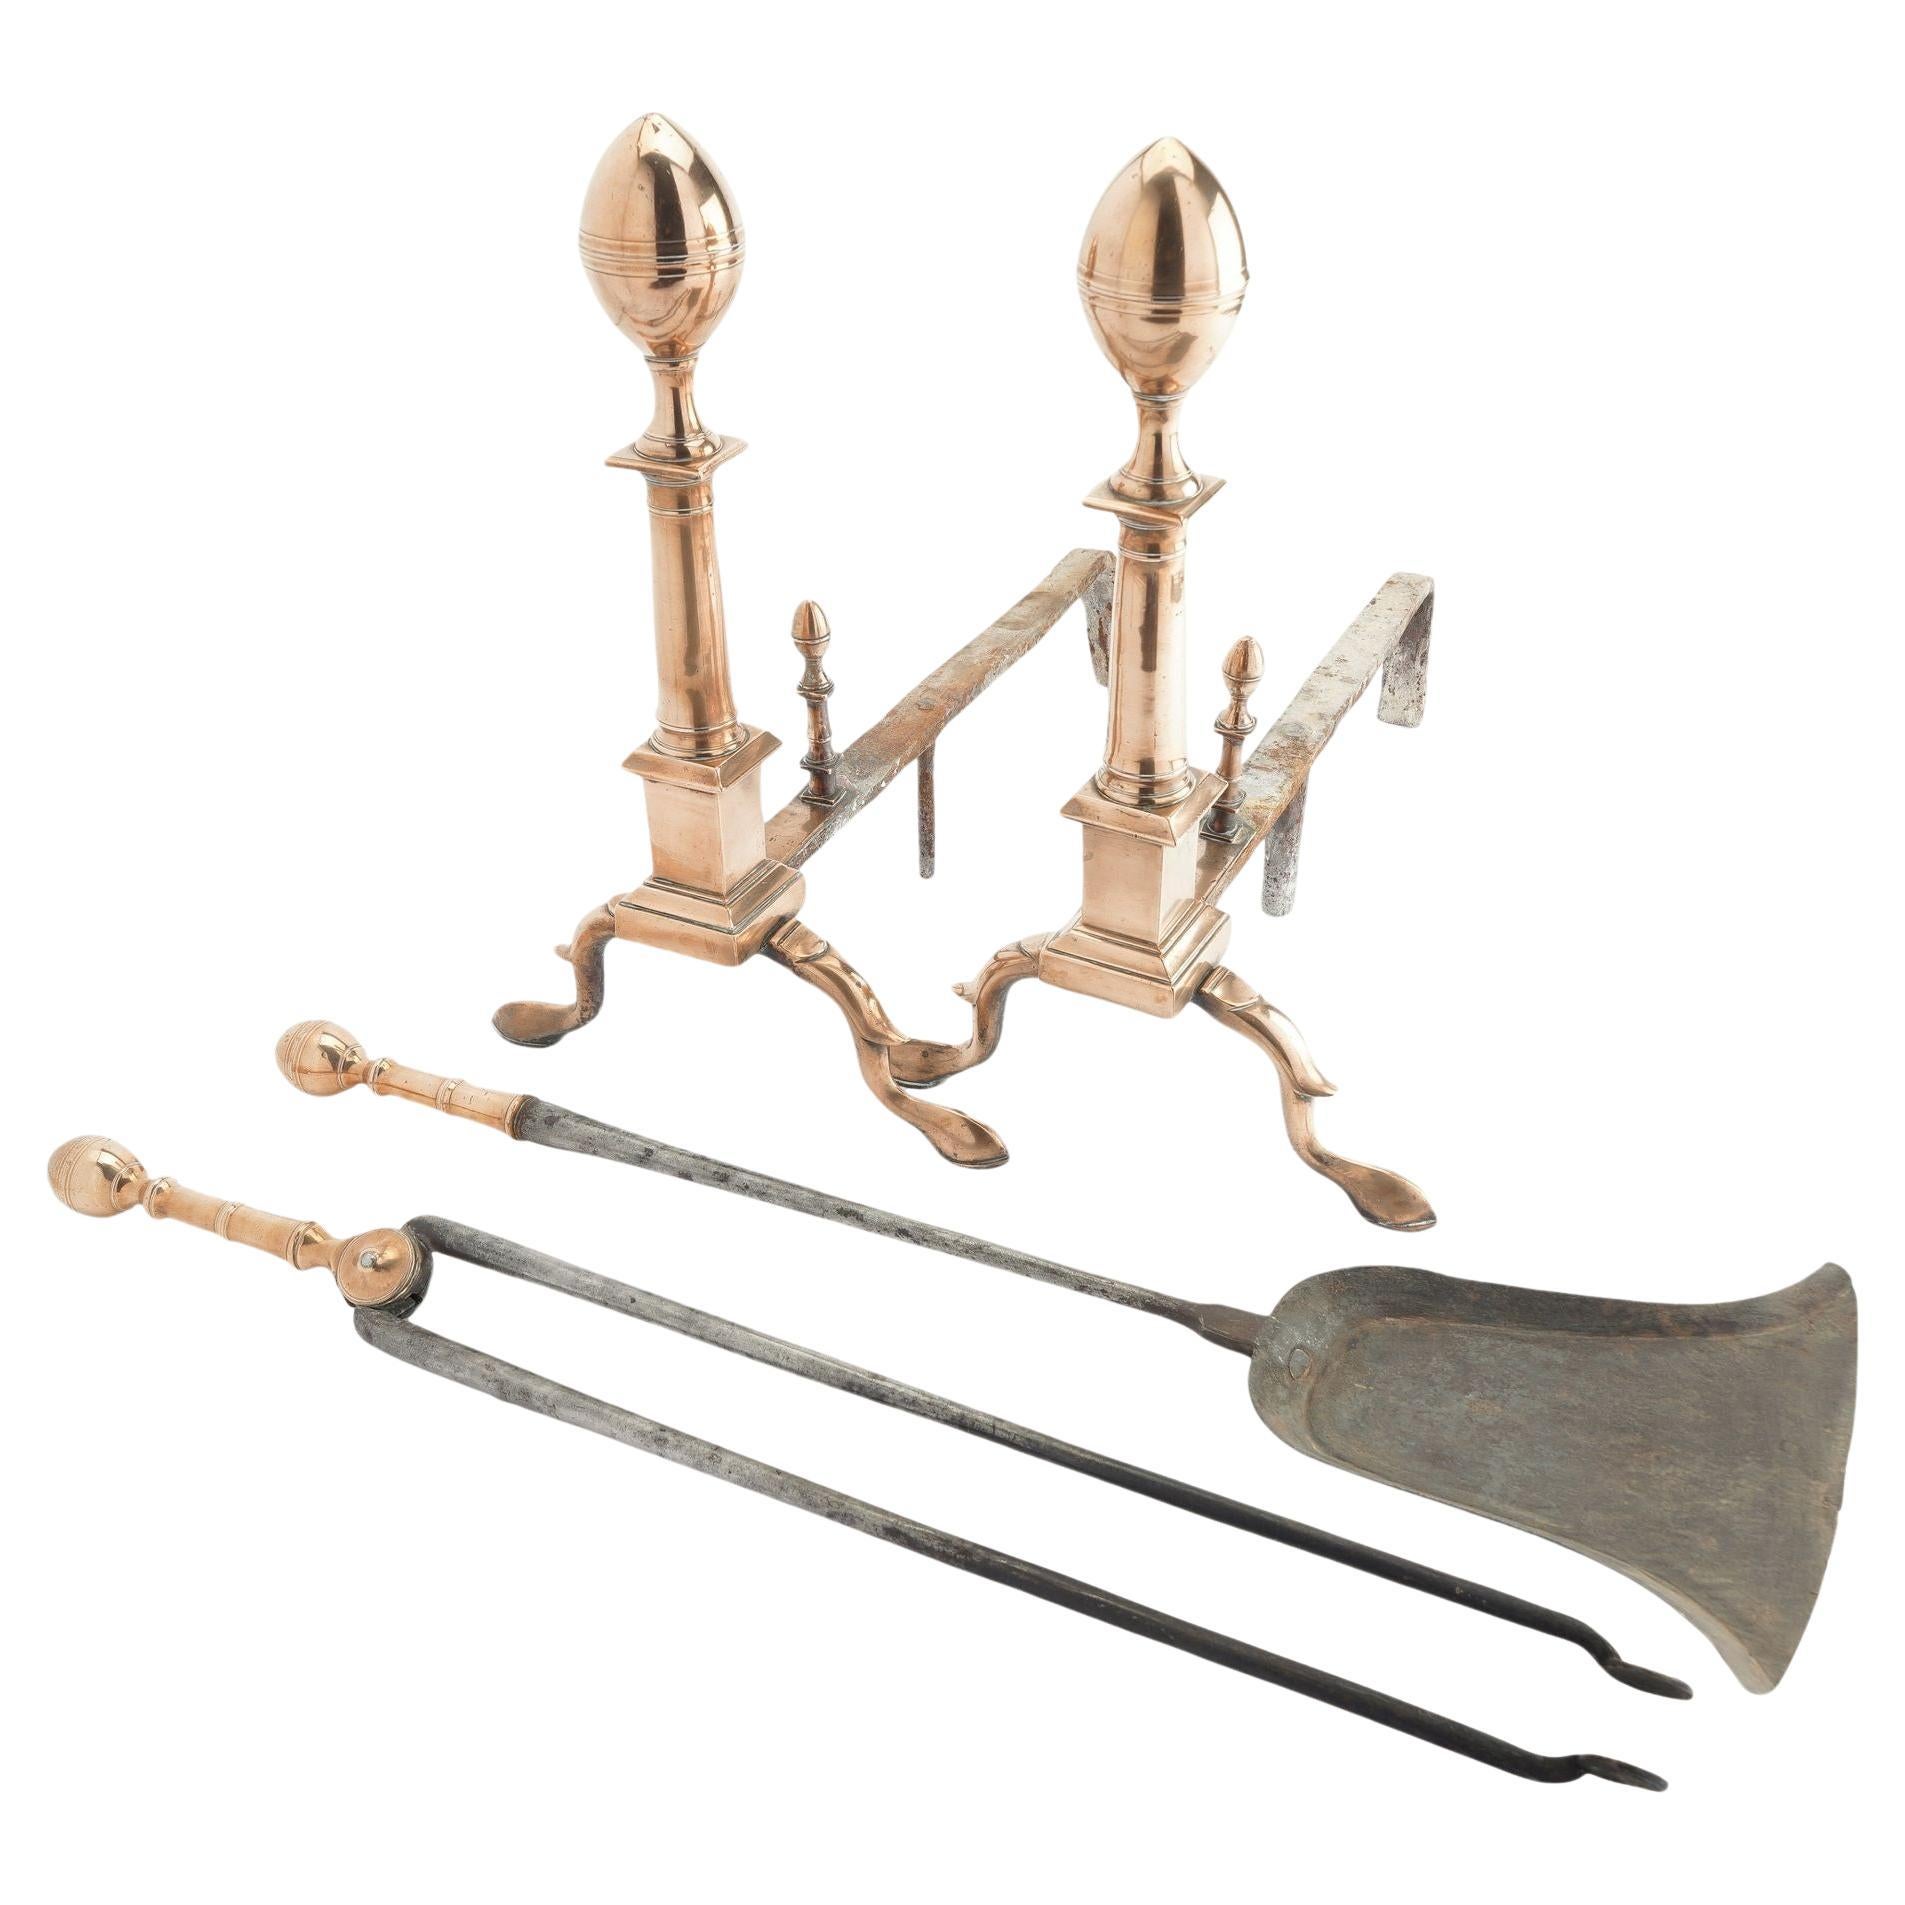 Boston bell metal lemon top andirons with matching fire tools, c. 1790 For Sale